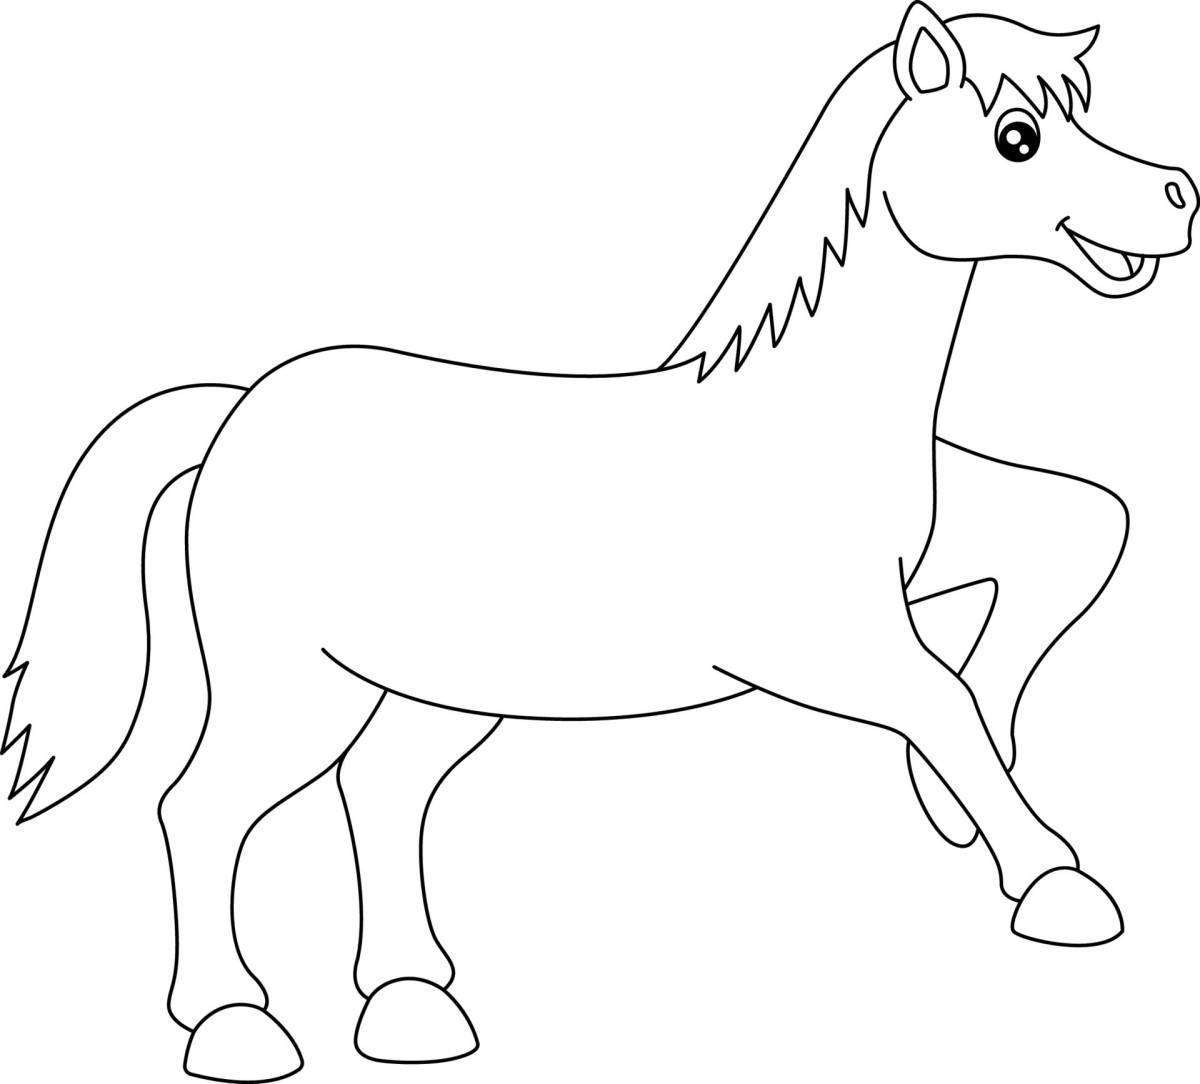 Bright coloring horse for children 5-6 years old